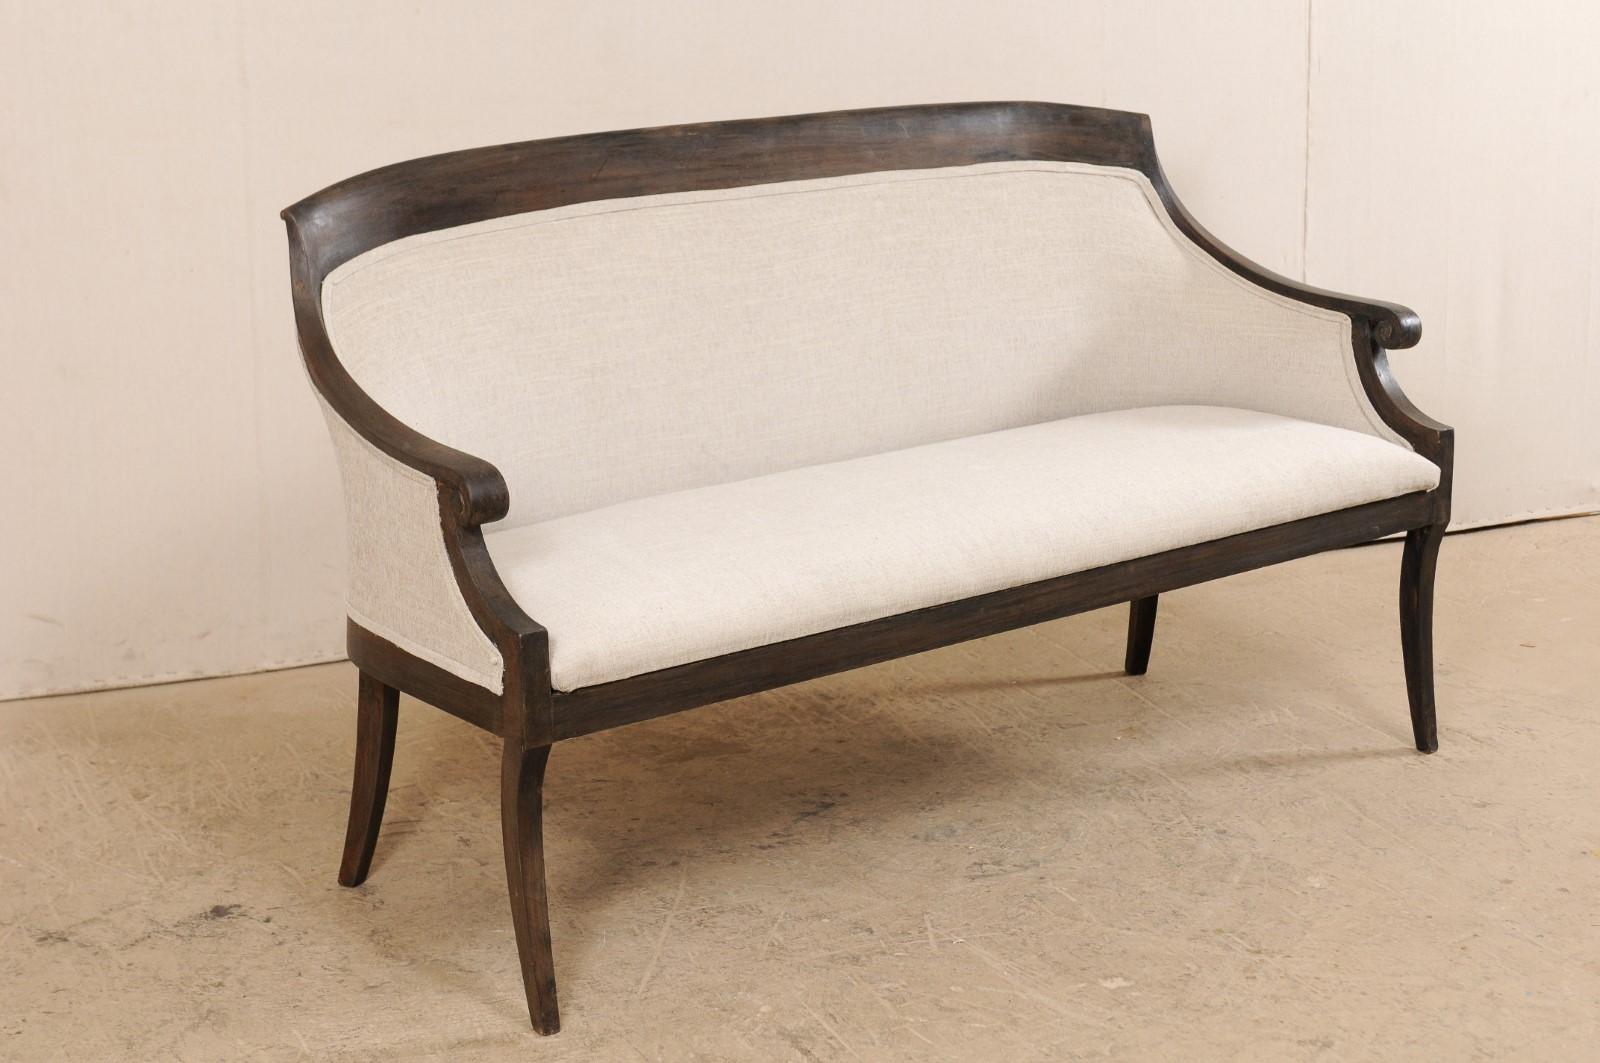 A Swedish upholstered settee from the mid-19th century. This antique sofa from Sweden, just over 5 feet in length, features a beautifully wrapped back with a raised, flat-edged wooden crest rail which flows gently down the arms into curled knuckles.